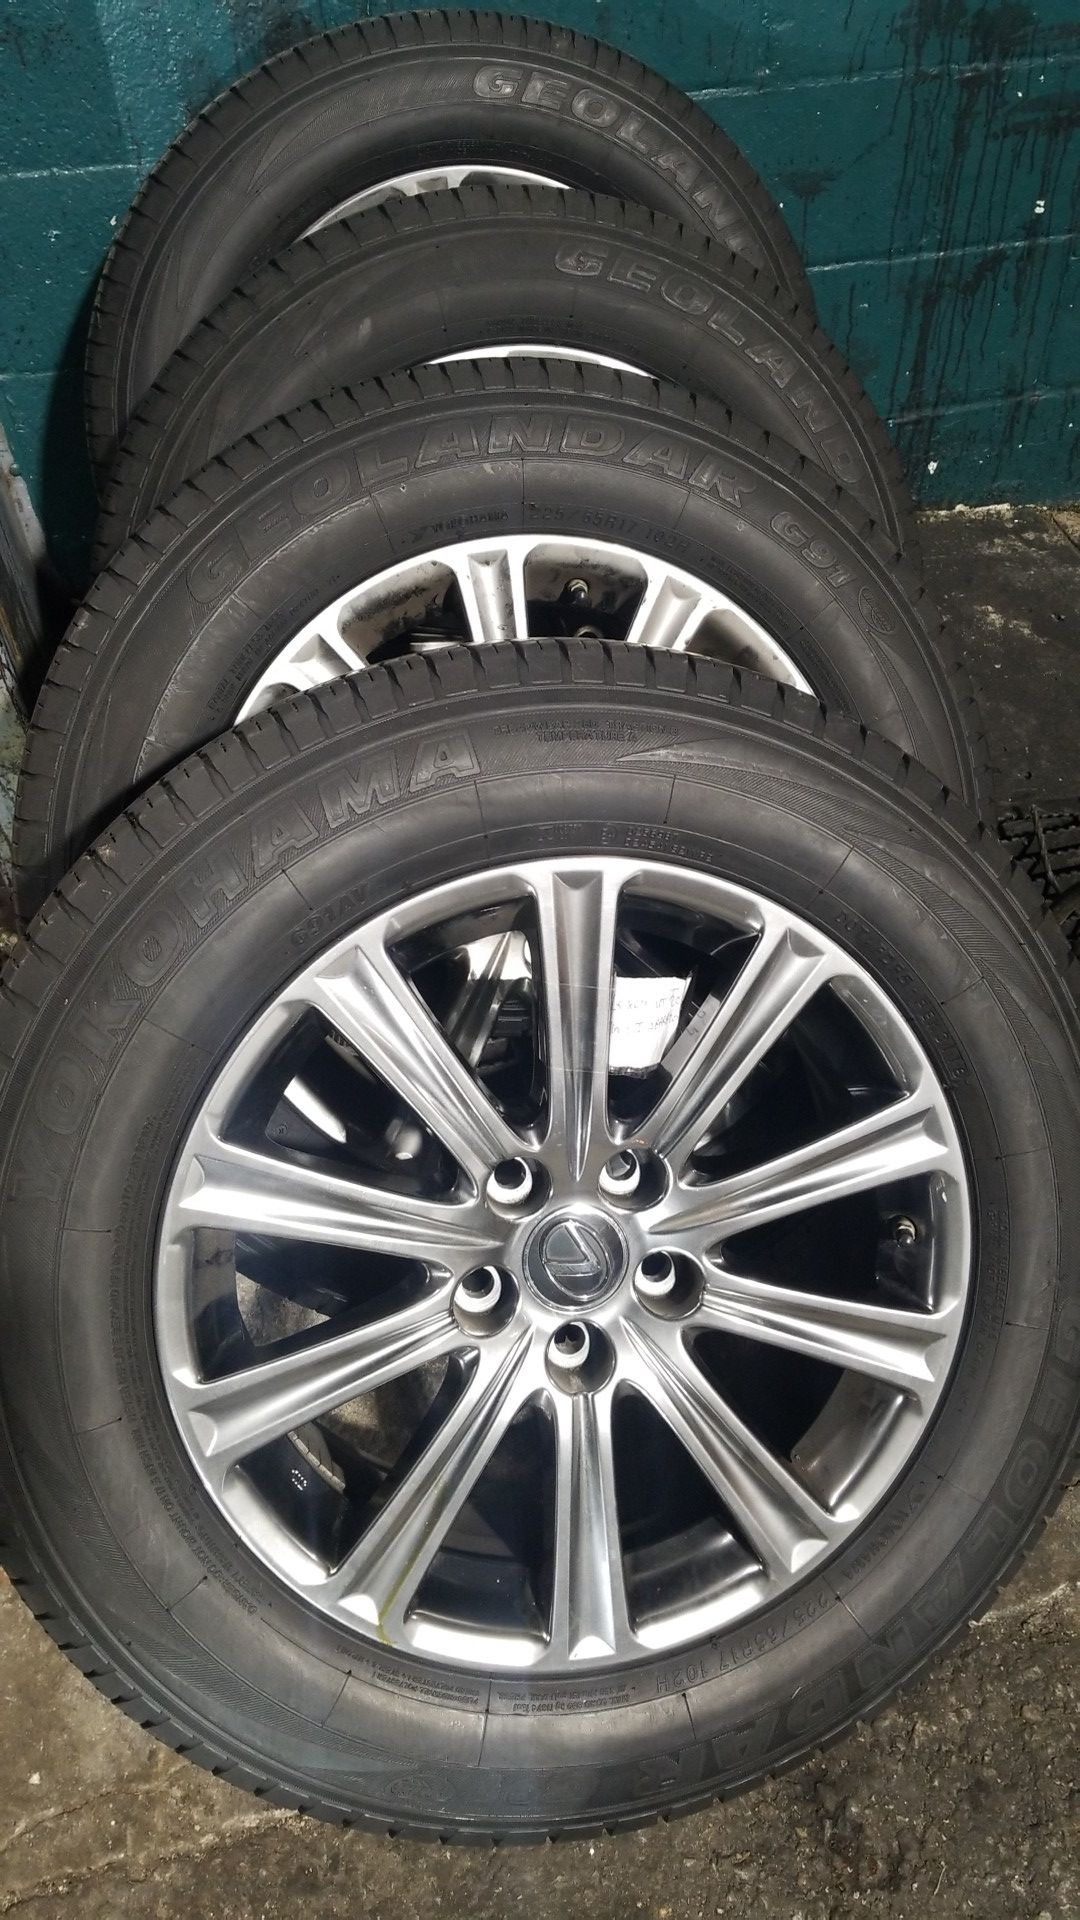 17" wheels with 2256517 tires for lexus and toyota